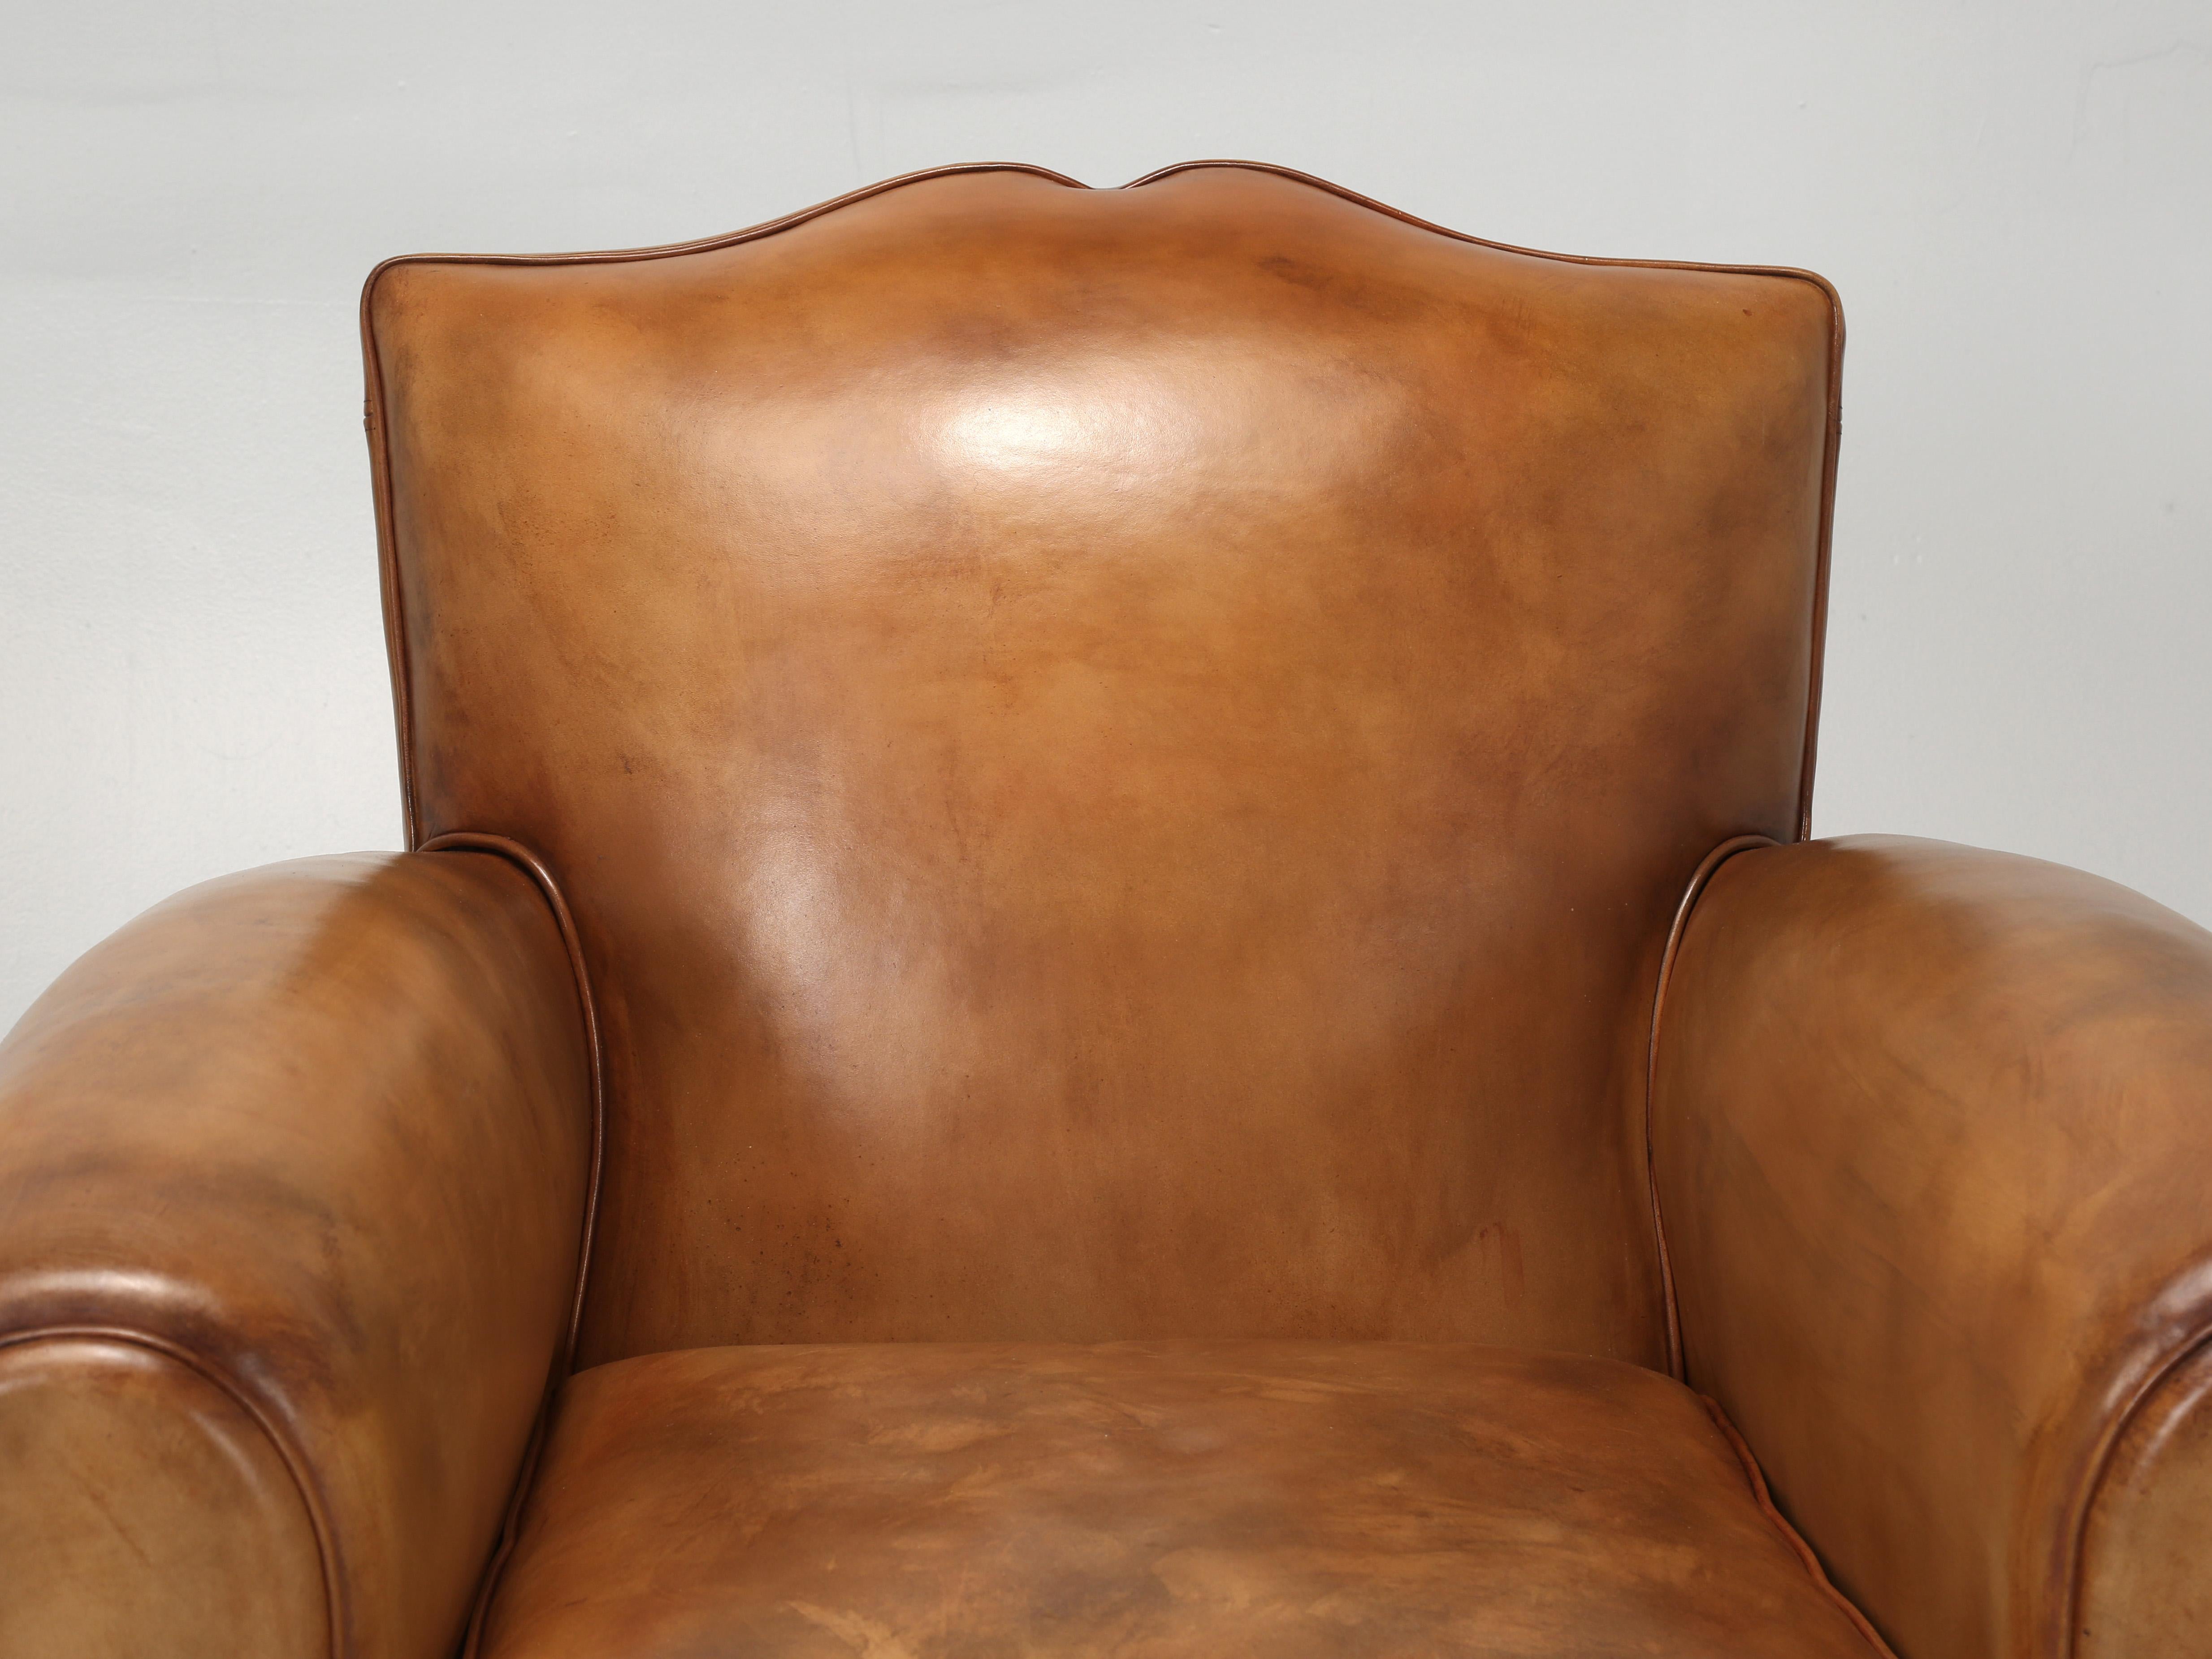 Original pair of French leather club chairs that our inhouse old plank upholstery department has painstakingly totally disassembled and rebuilt using old school methods. The restoration of the French leather club chairs, left nothing untouched,